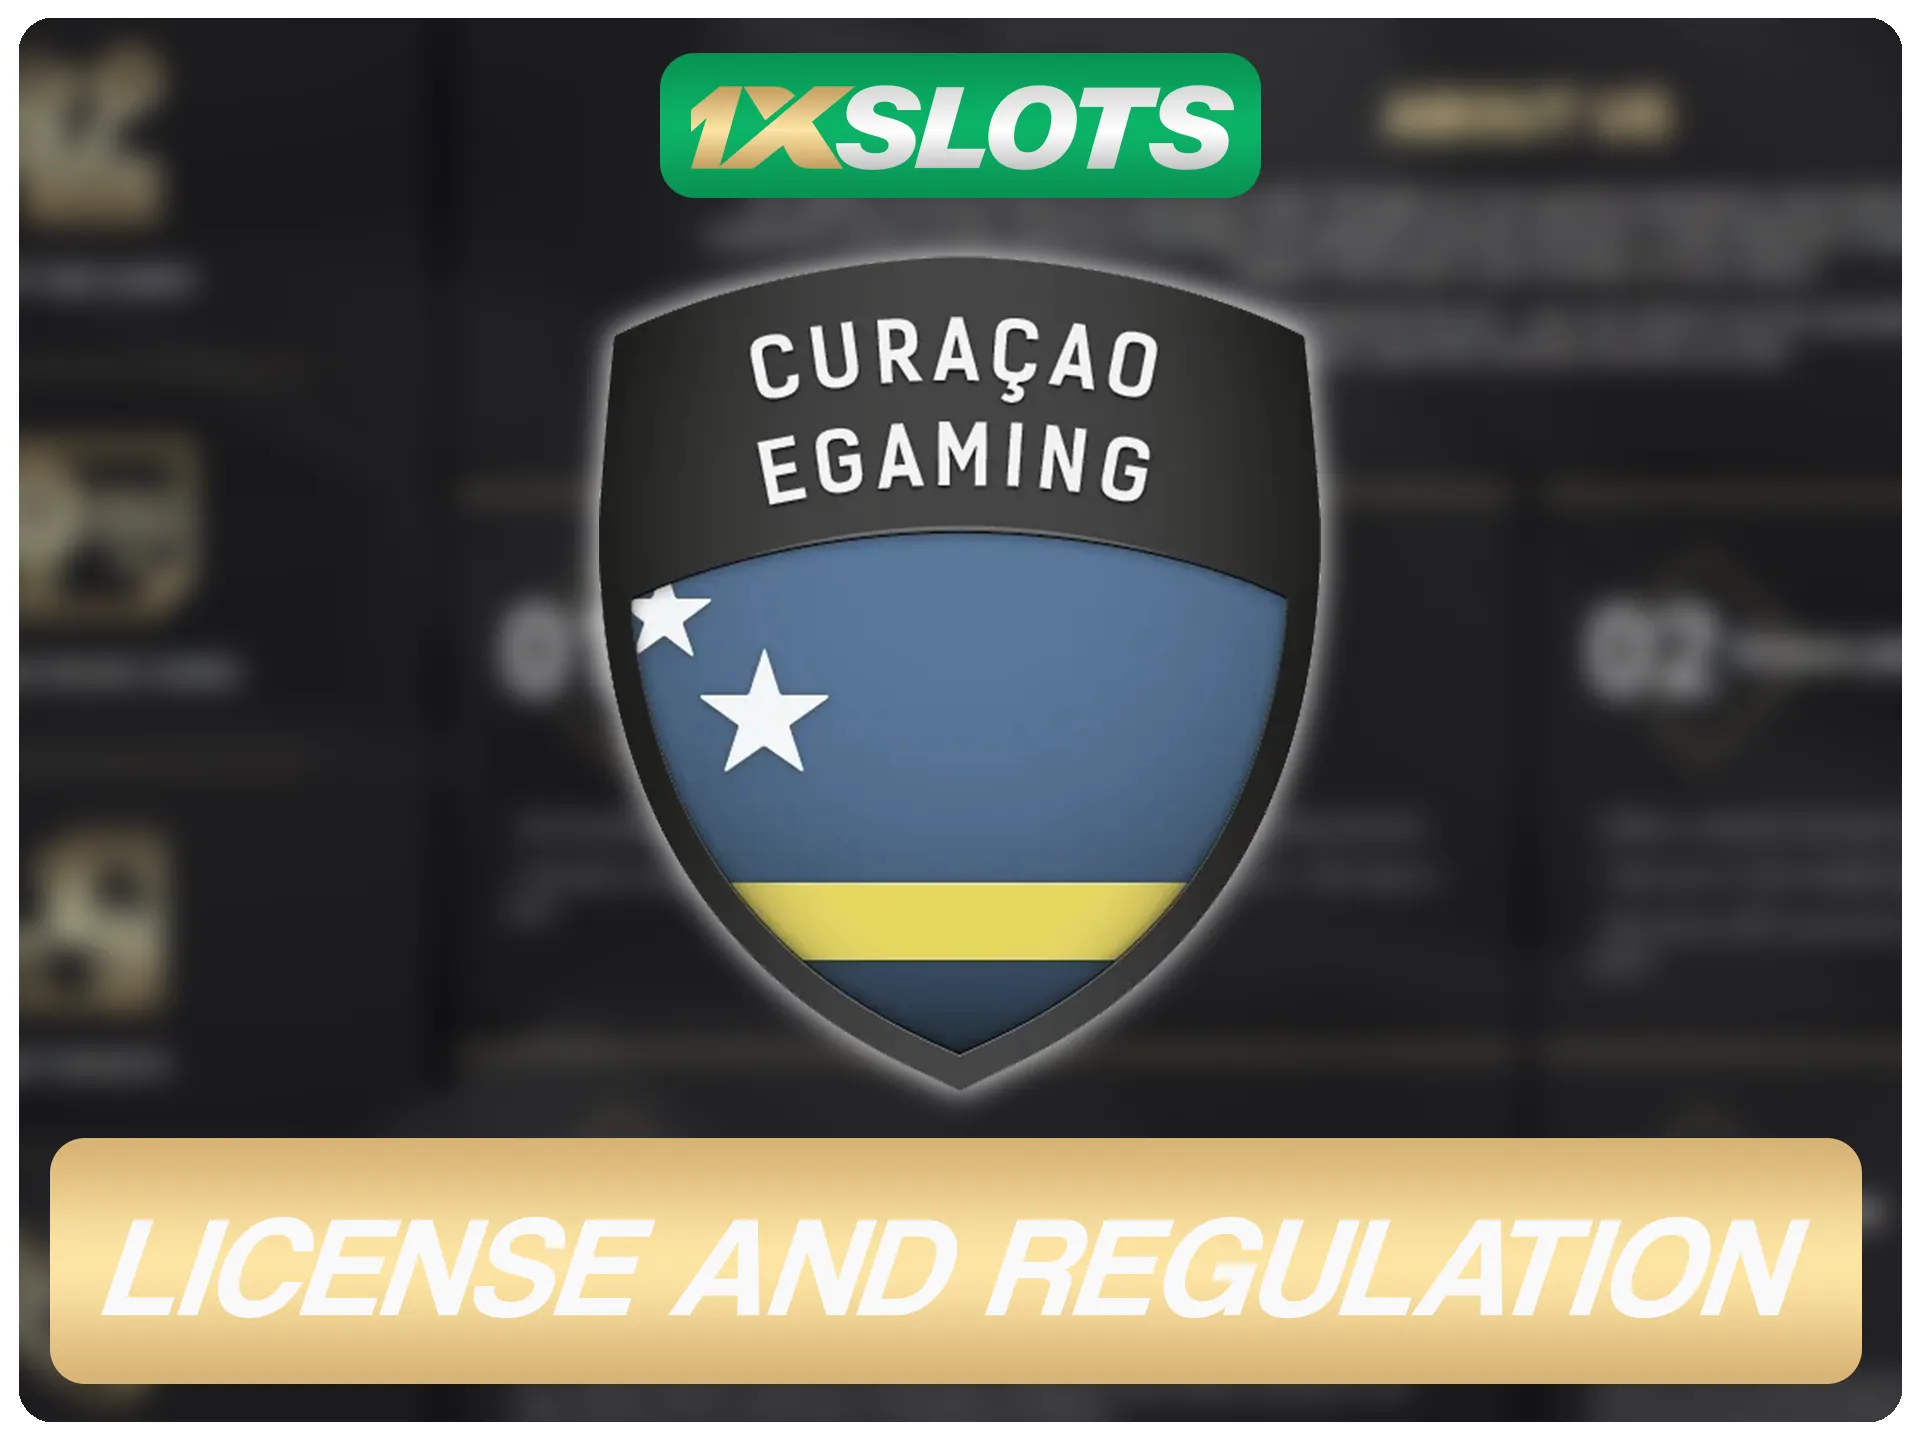 1xSlots has all of the required licenses for working as a betting company.